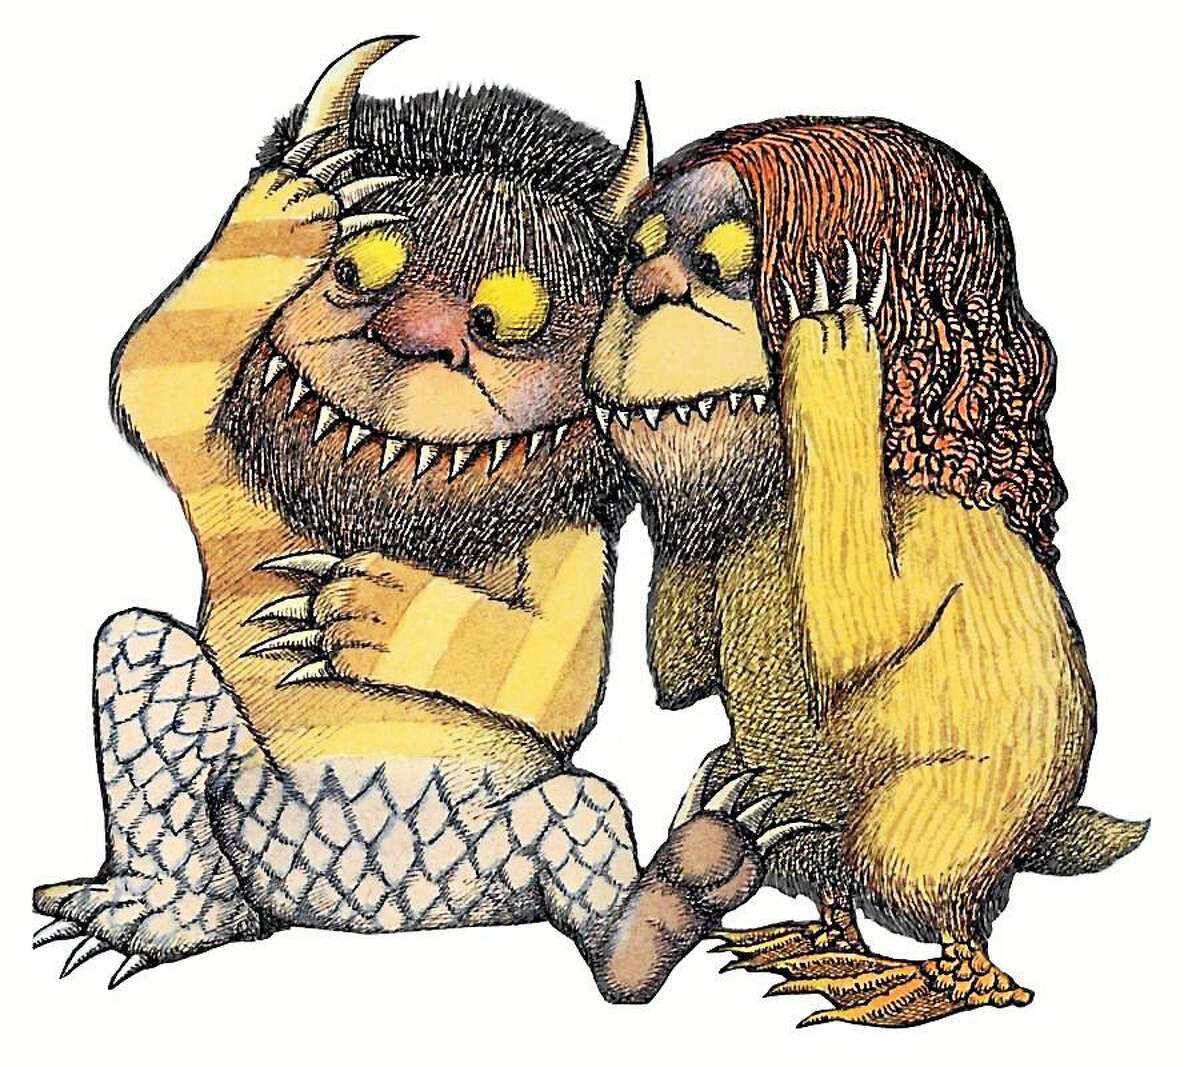 “Where the Wild Things Are” (via wikiart.org)